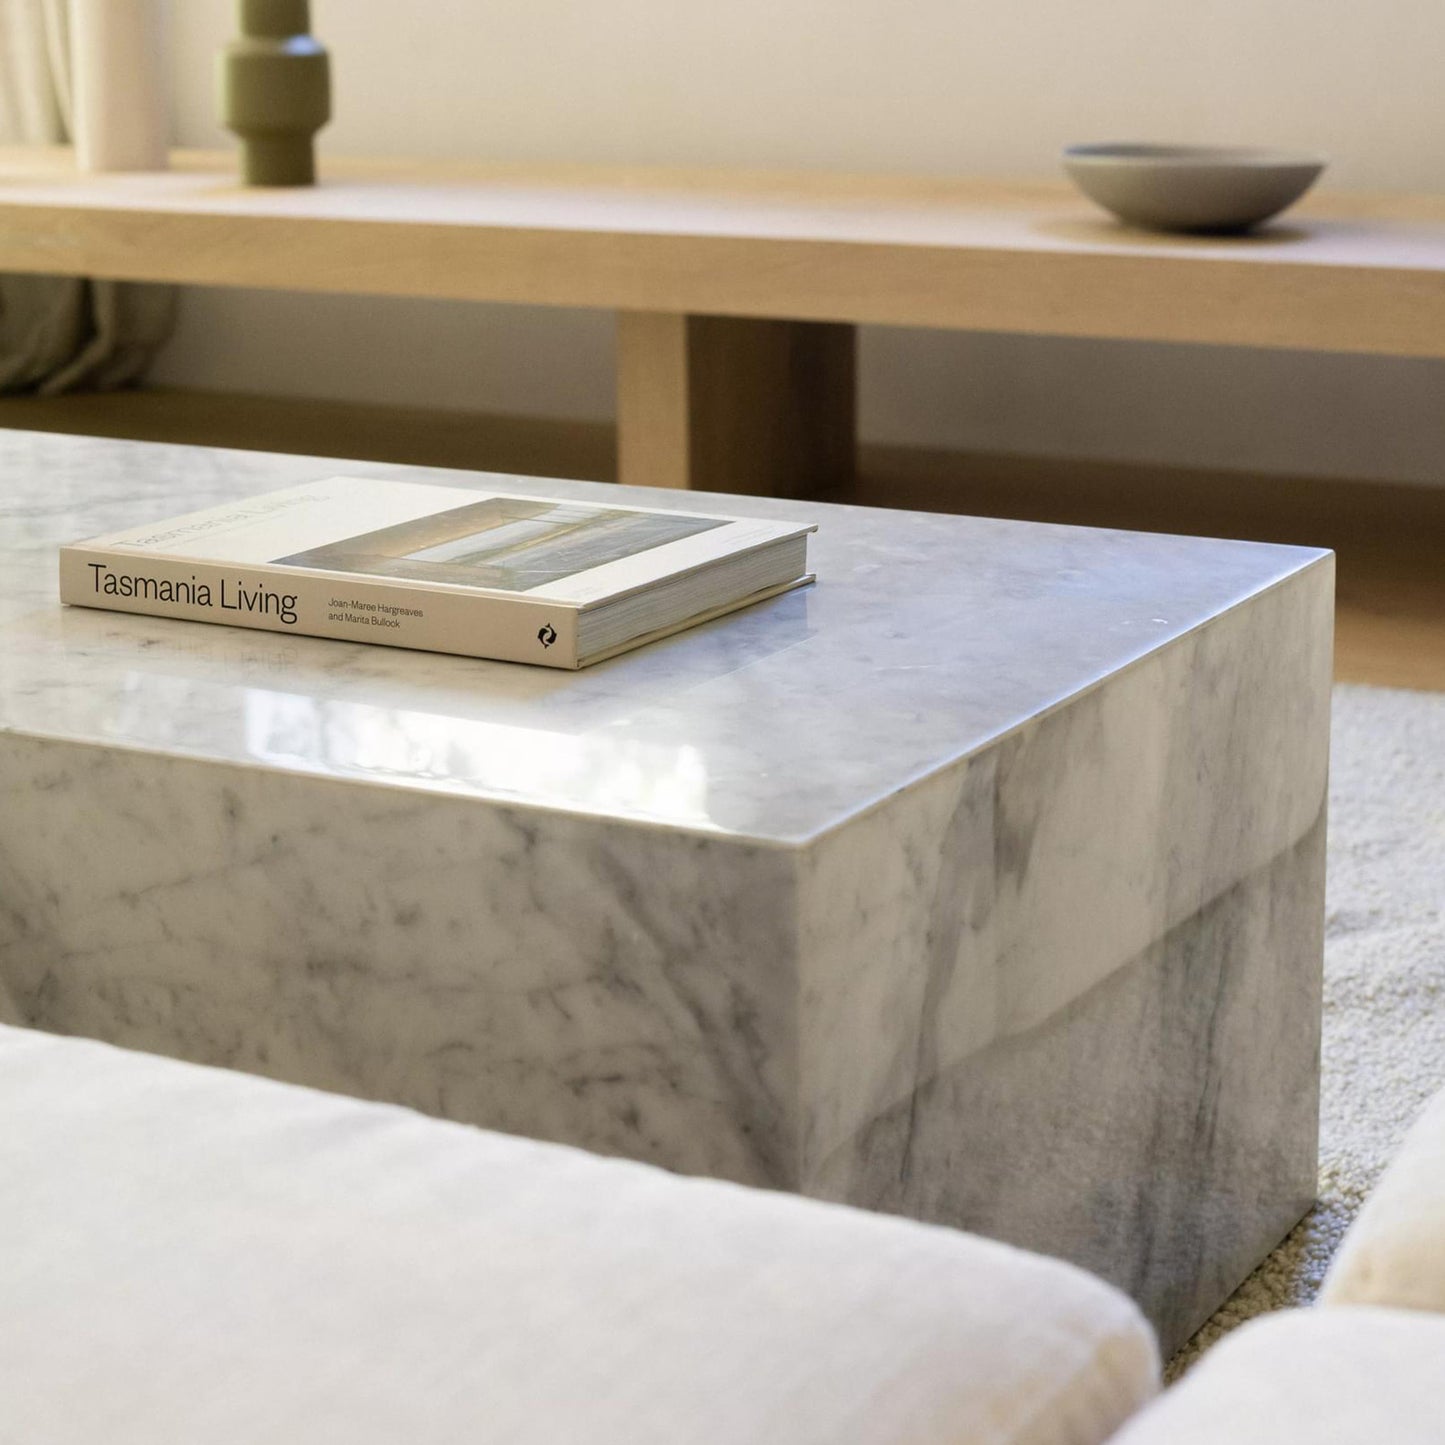 Stage Marble Coffee Table - Grey Carrara